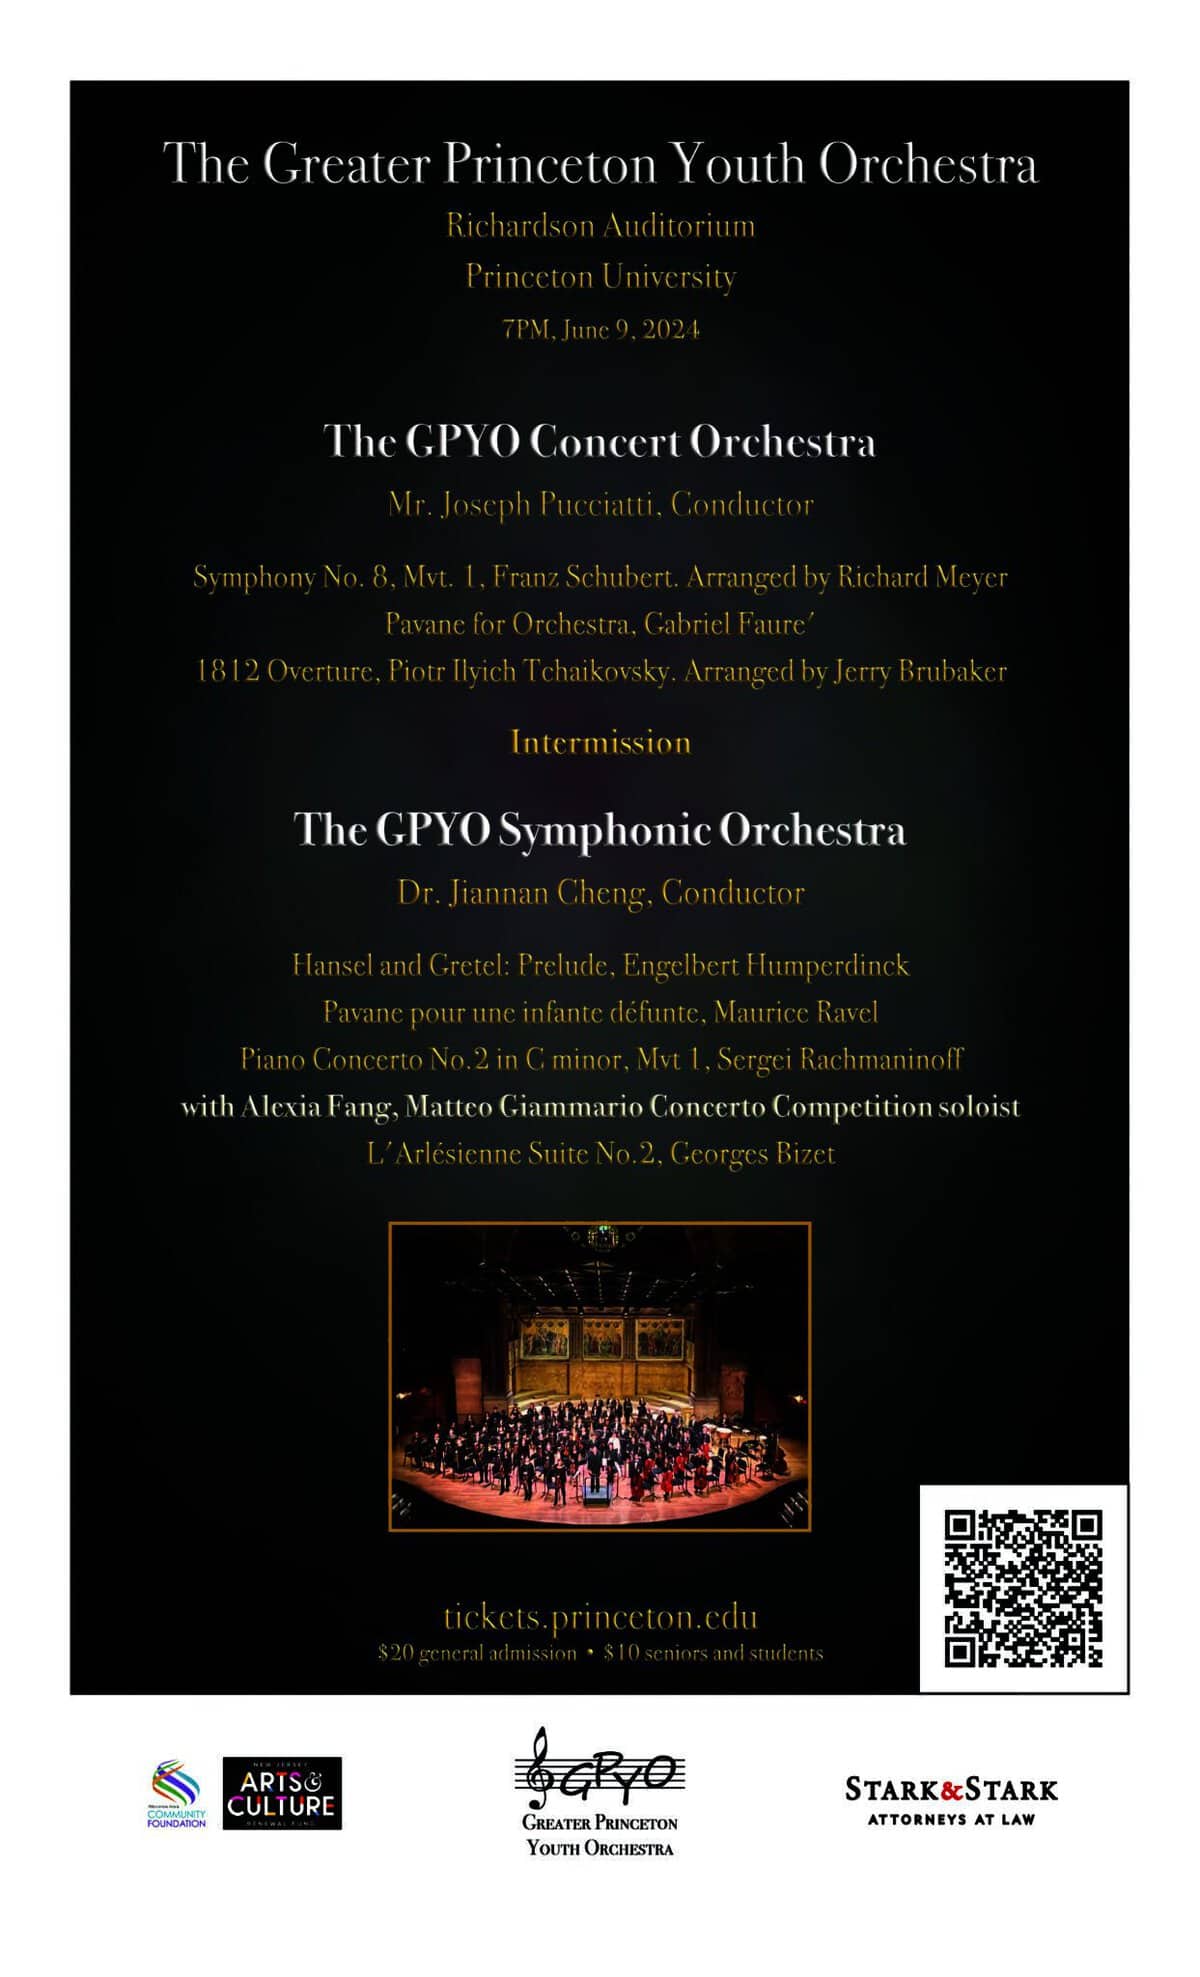 The Greater Princeton Youth Orchestra Spring Finale Concert